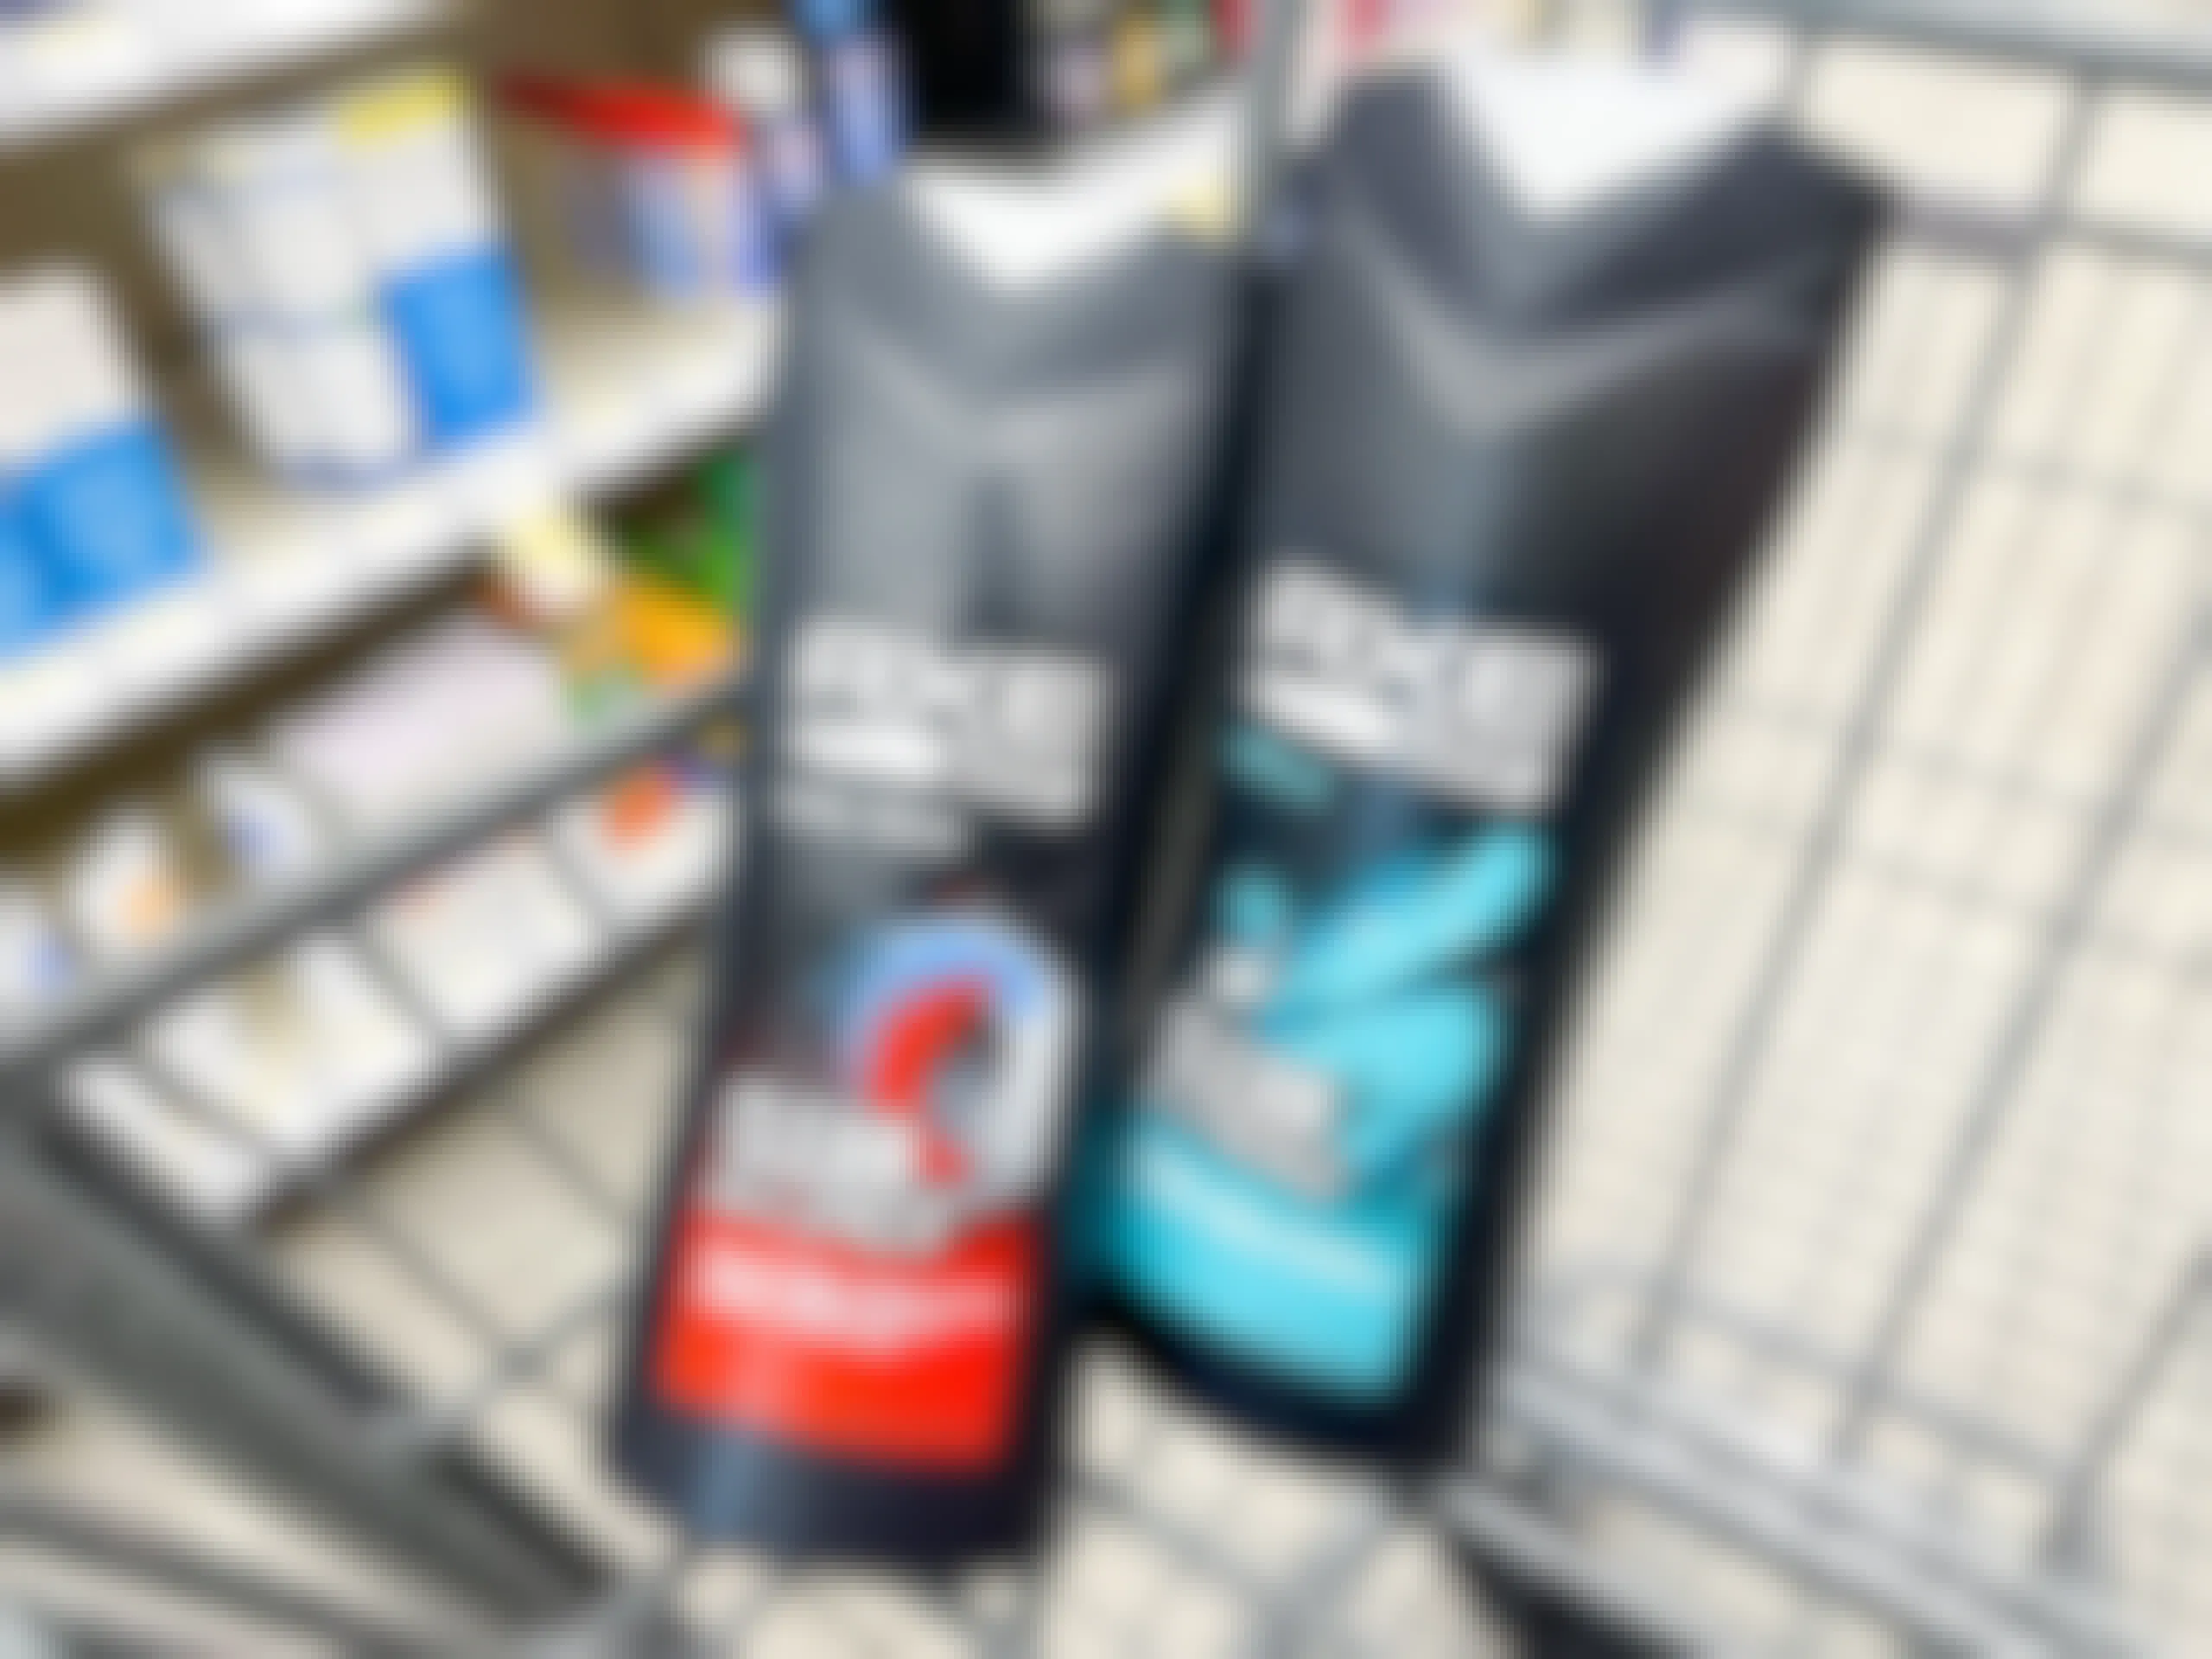 two bottles of axe body wash in shopping cart